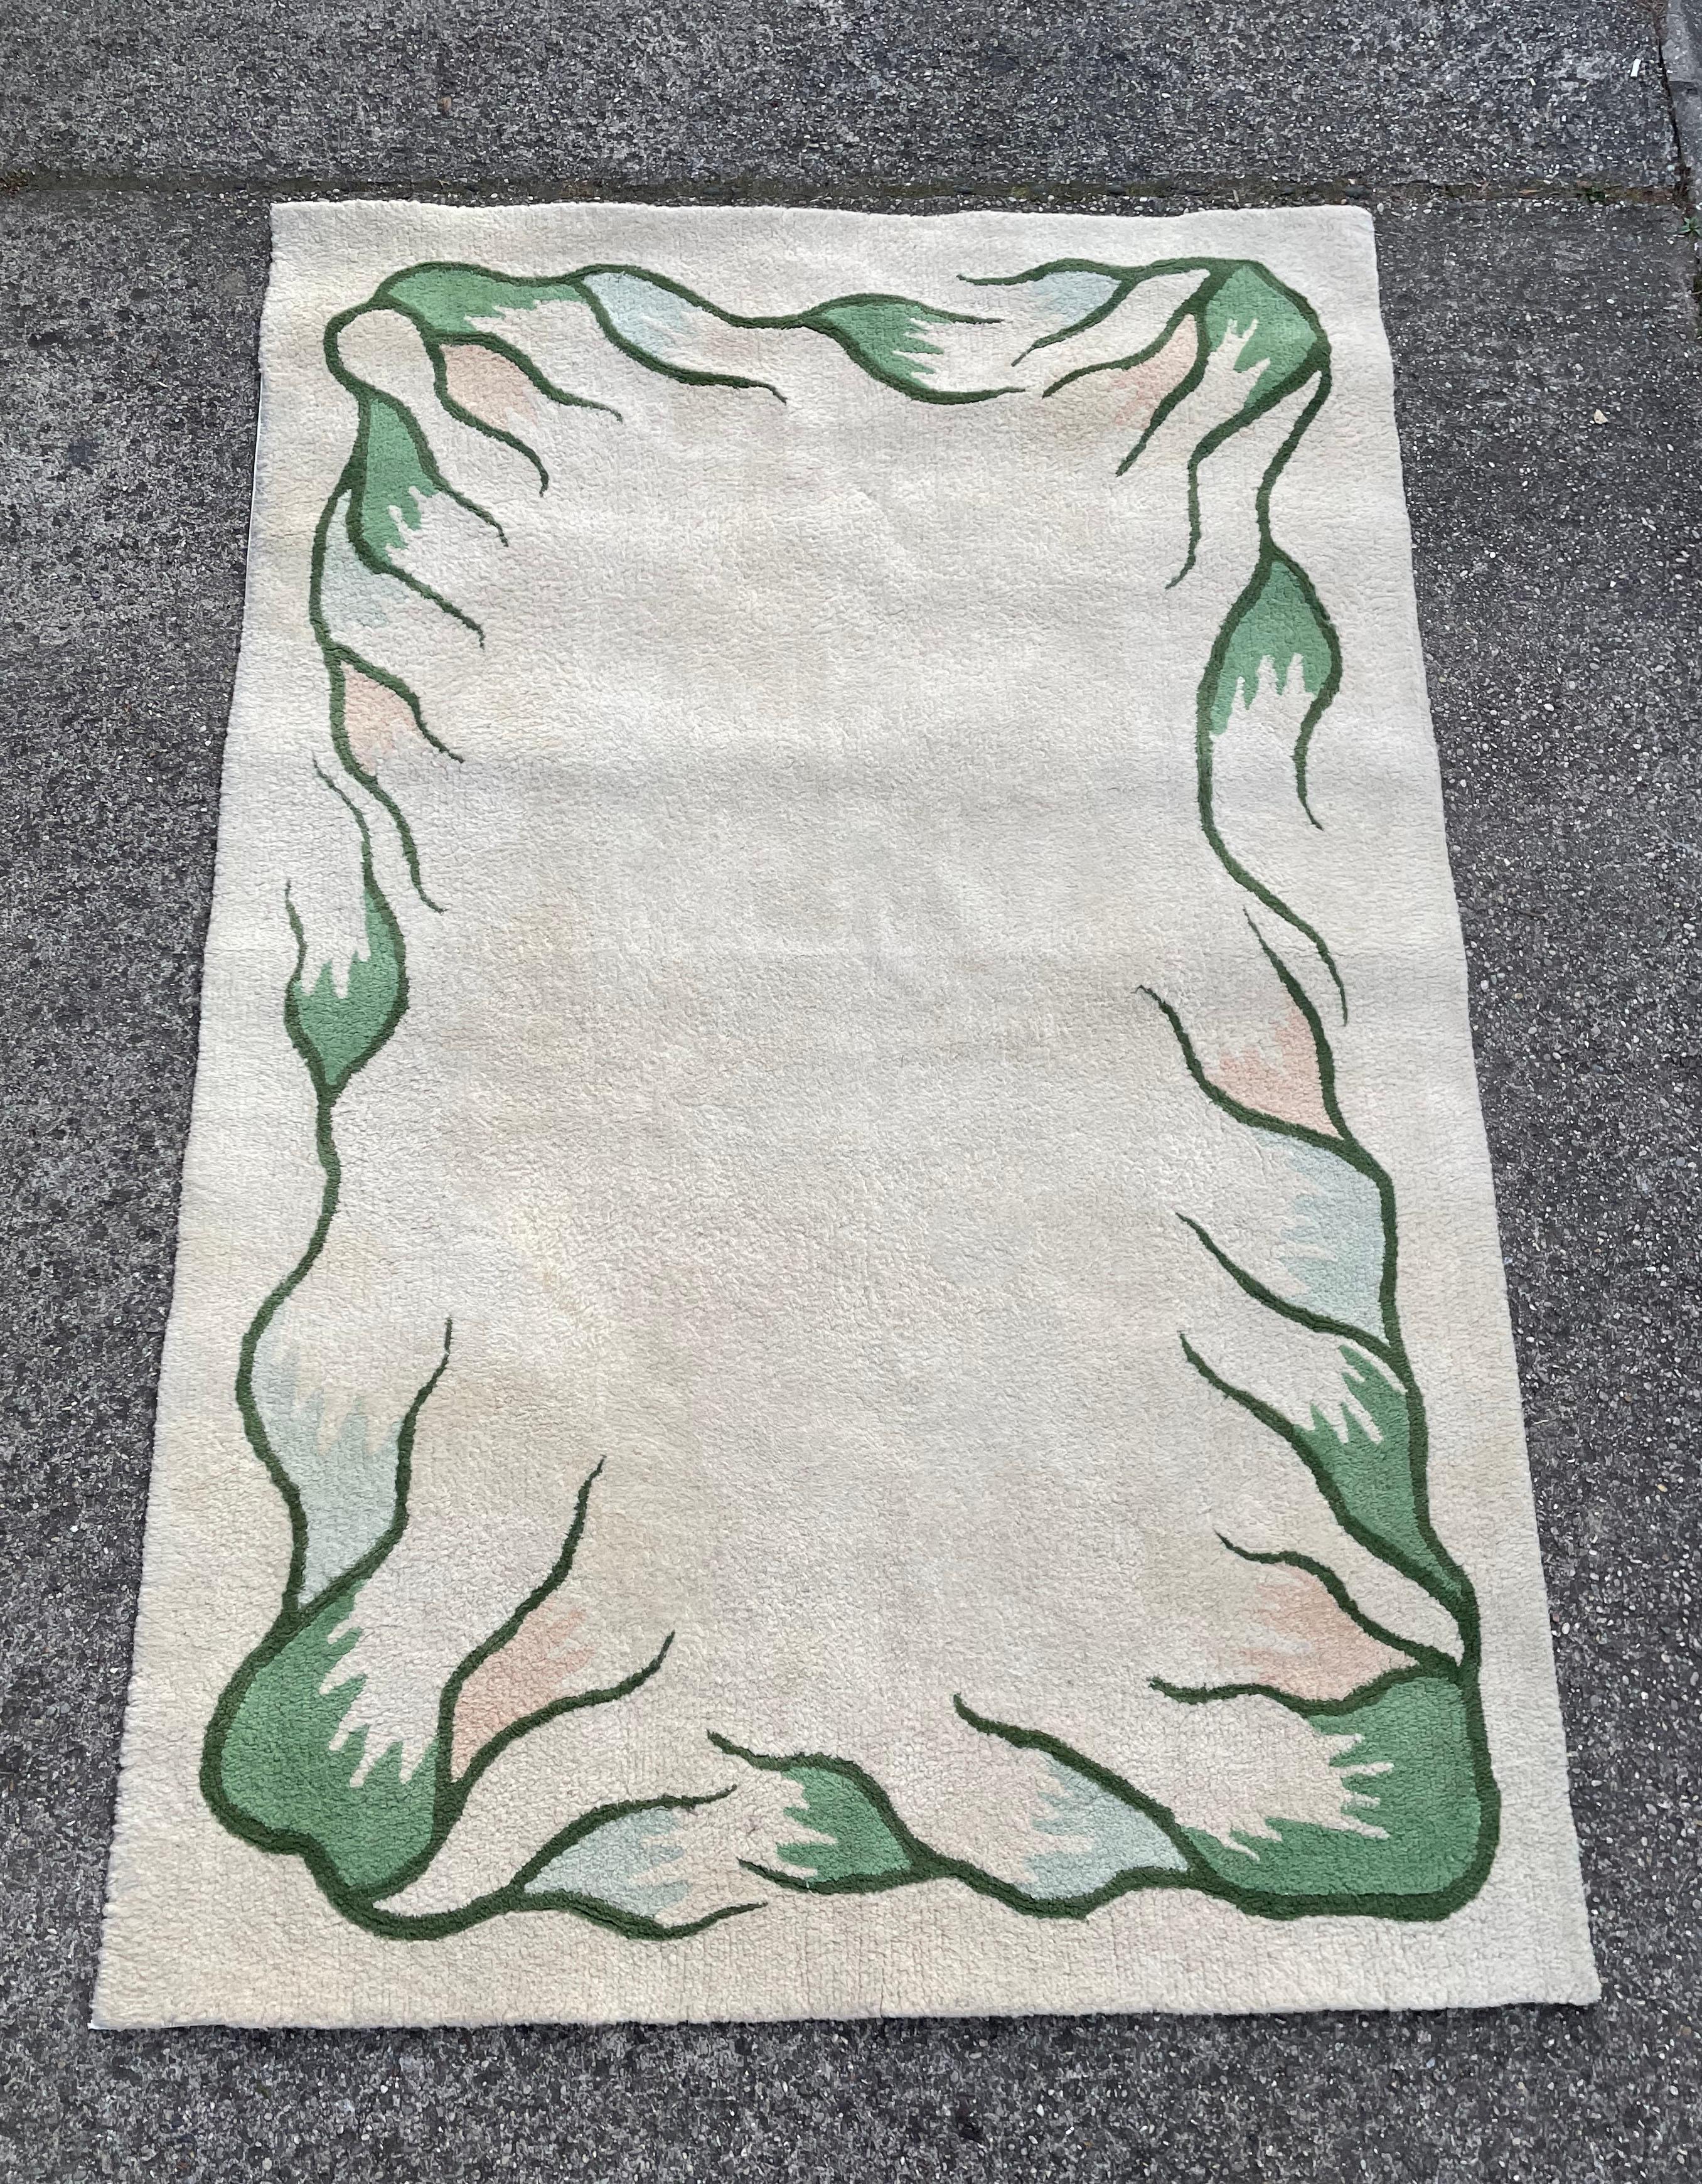 Vintage European hand-tufted wool rug.

Age: ca1960s

Made of wool, with beautiful floral decoration in green color with pale blue and pink details.

The rug remains in very good vintage condition, with small traces of cosmetic wear, as seen